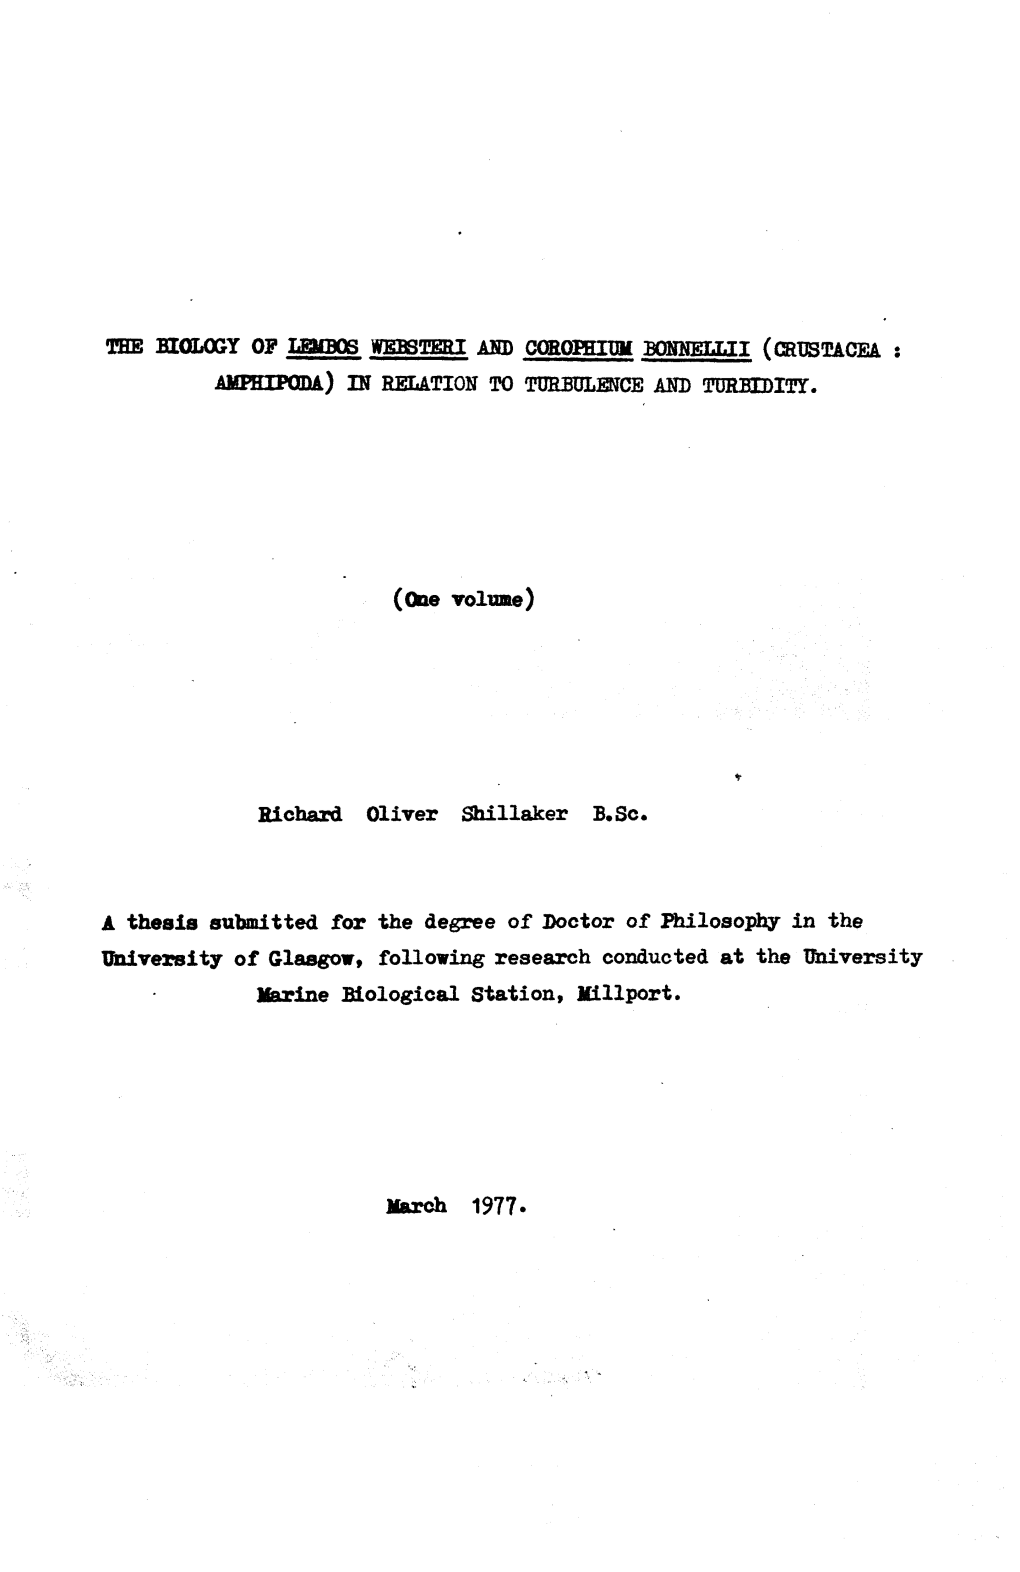 (One Volume) Richard Oliver Shillaker B.Sc. a Thesis Submitted for the Degree of Doctor of Philosophy in the University Of